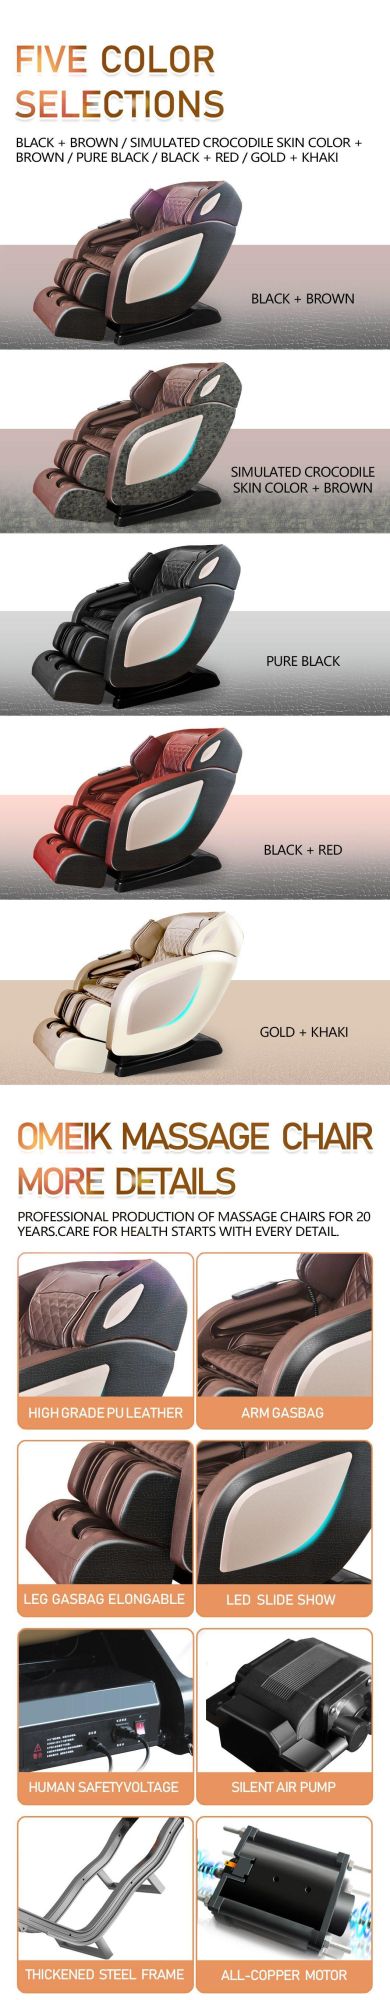 High Quality Low Price Super Deluxe Relax and Thai Massage Chair with Full Body